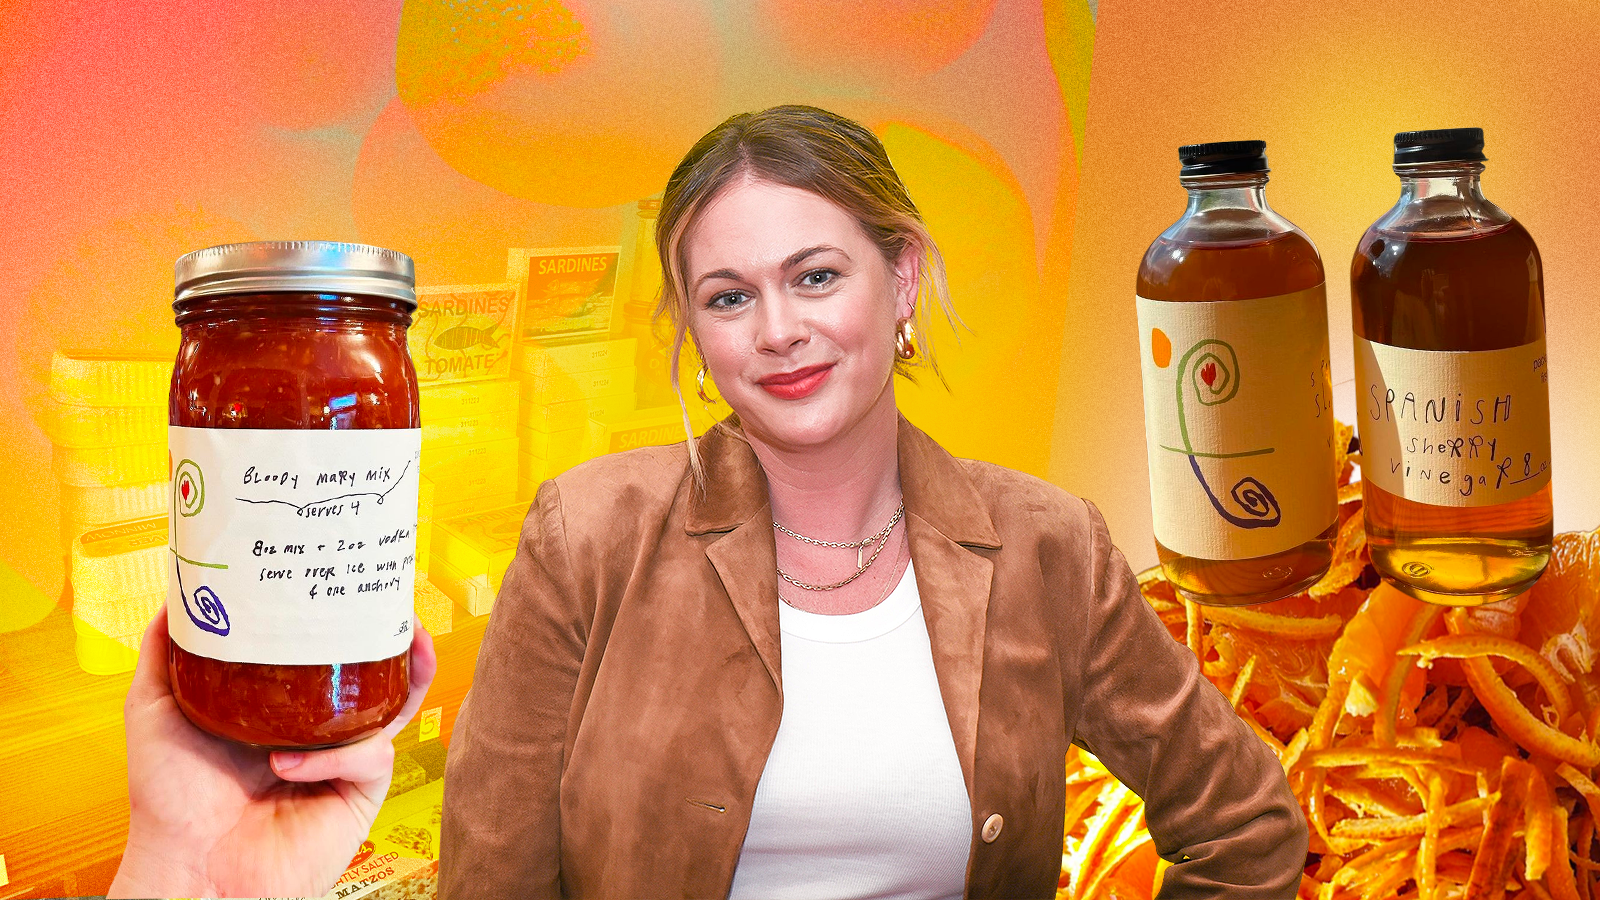 Alison Roman in a collage superimposed next to a jar of bloody Mary mix and vinegars.